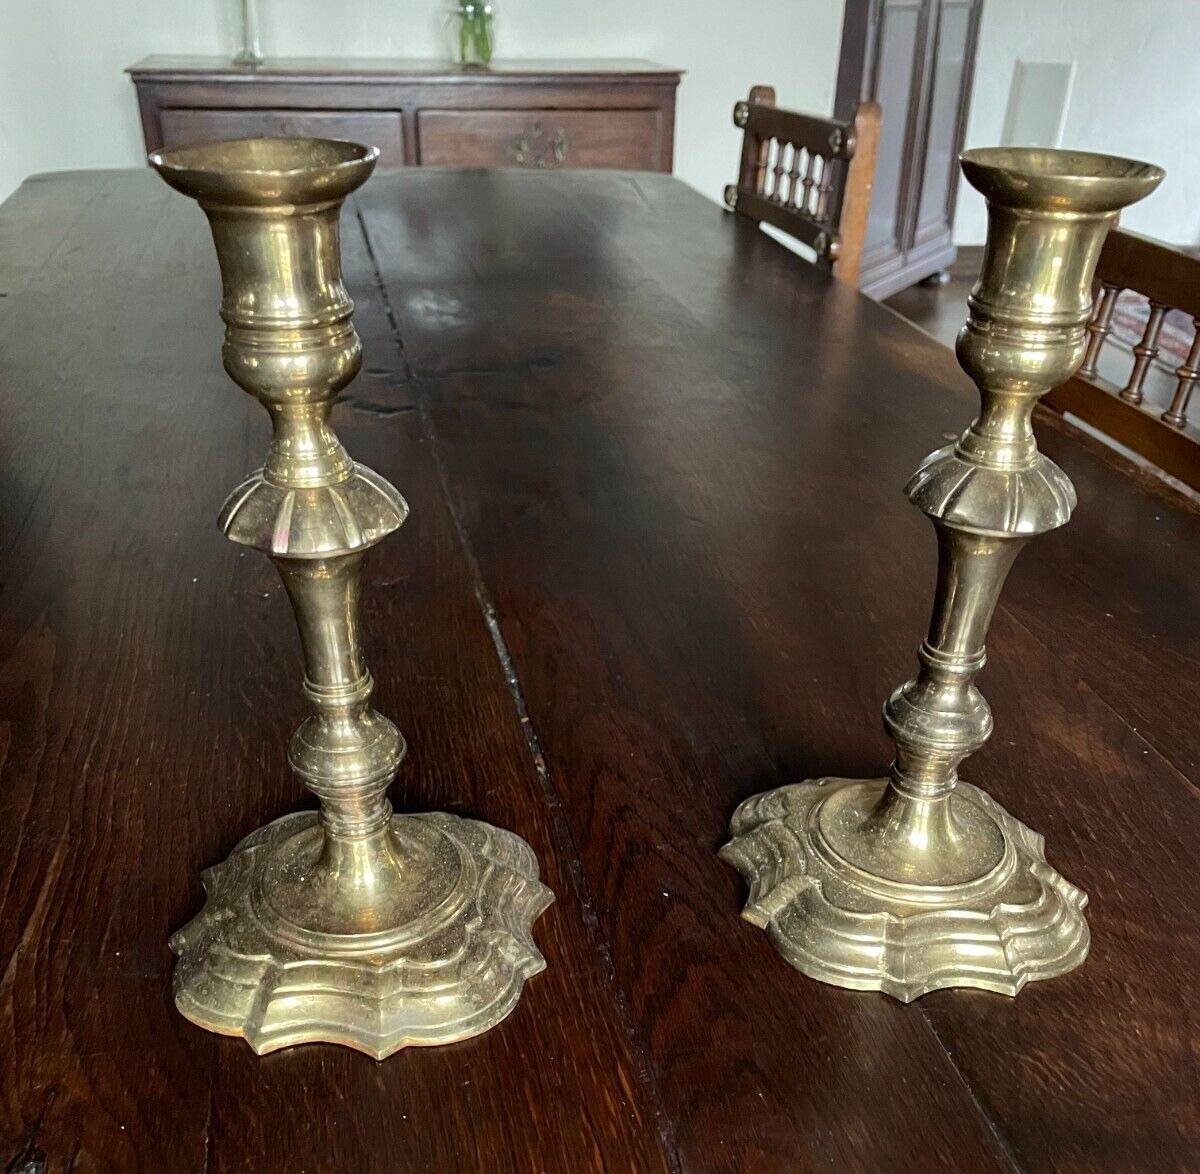 2 Mottahedeh Brass Candlesticks 9” Tall Historic Charleston Reproduction